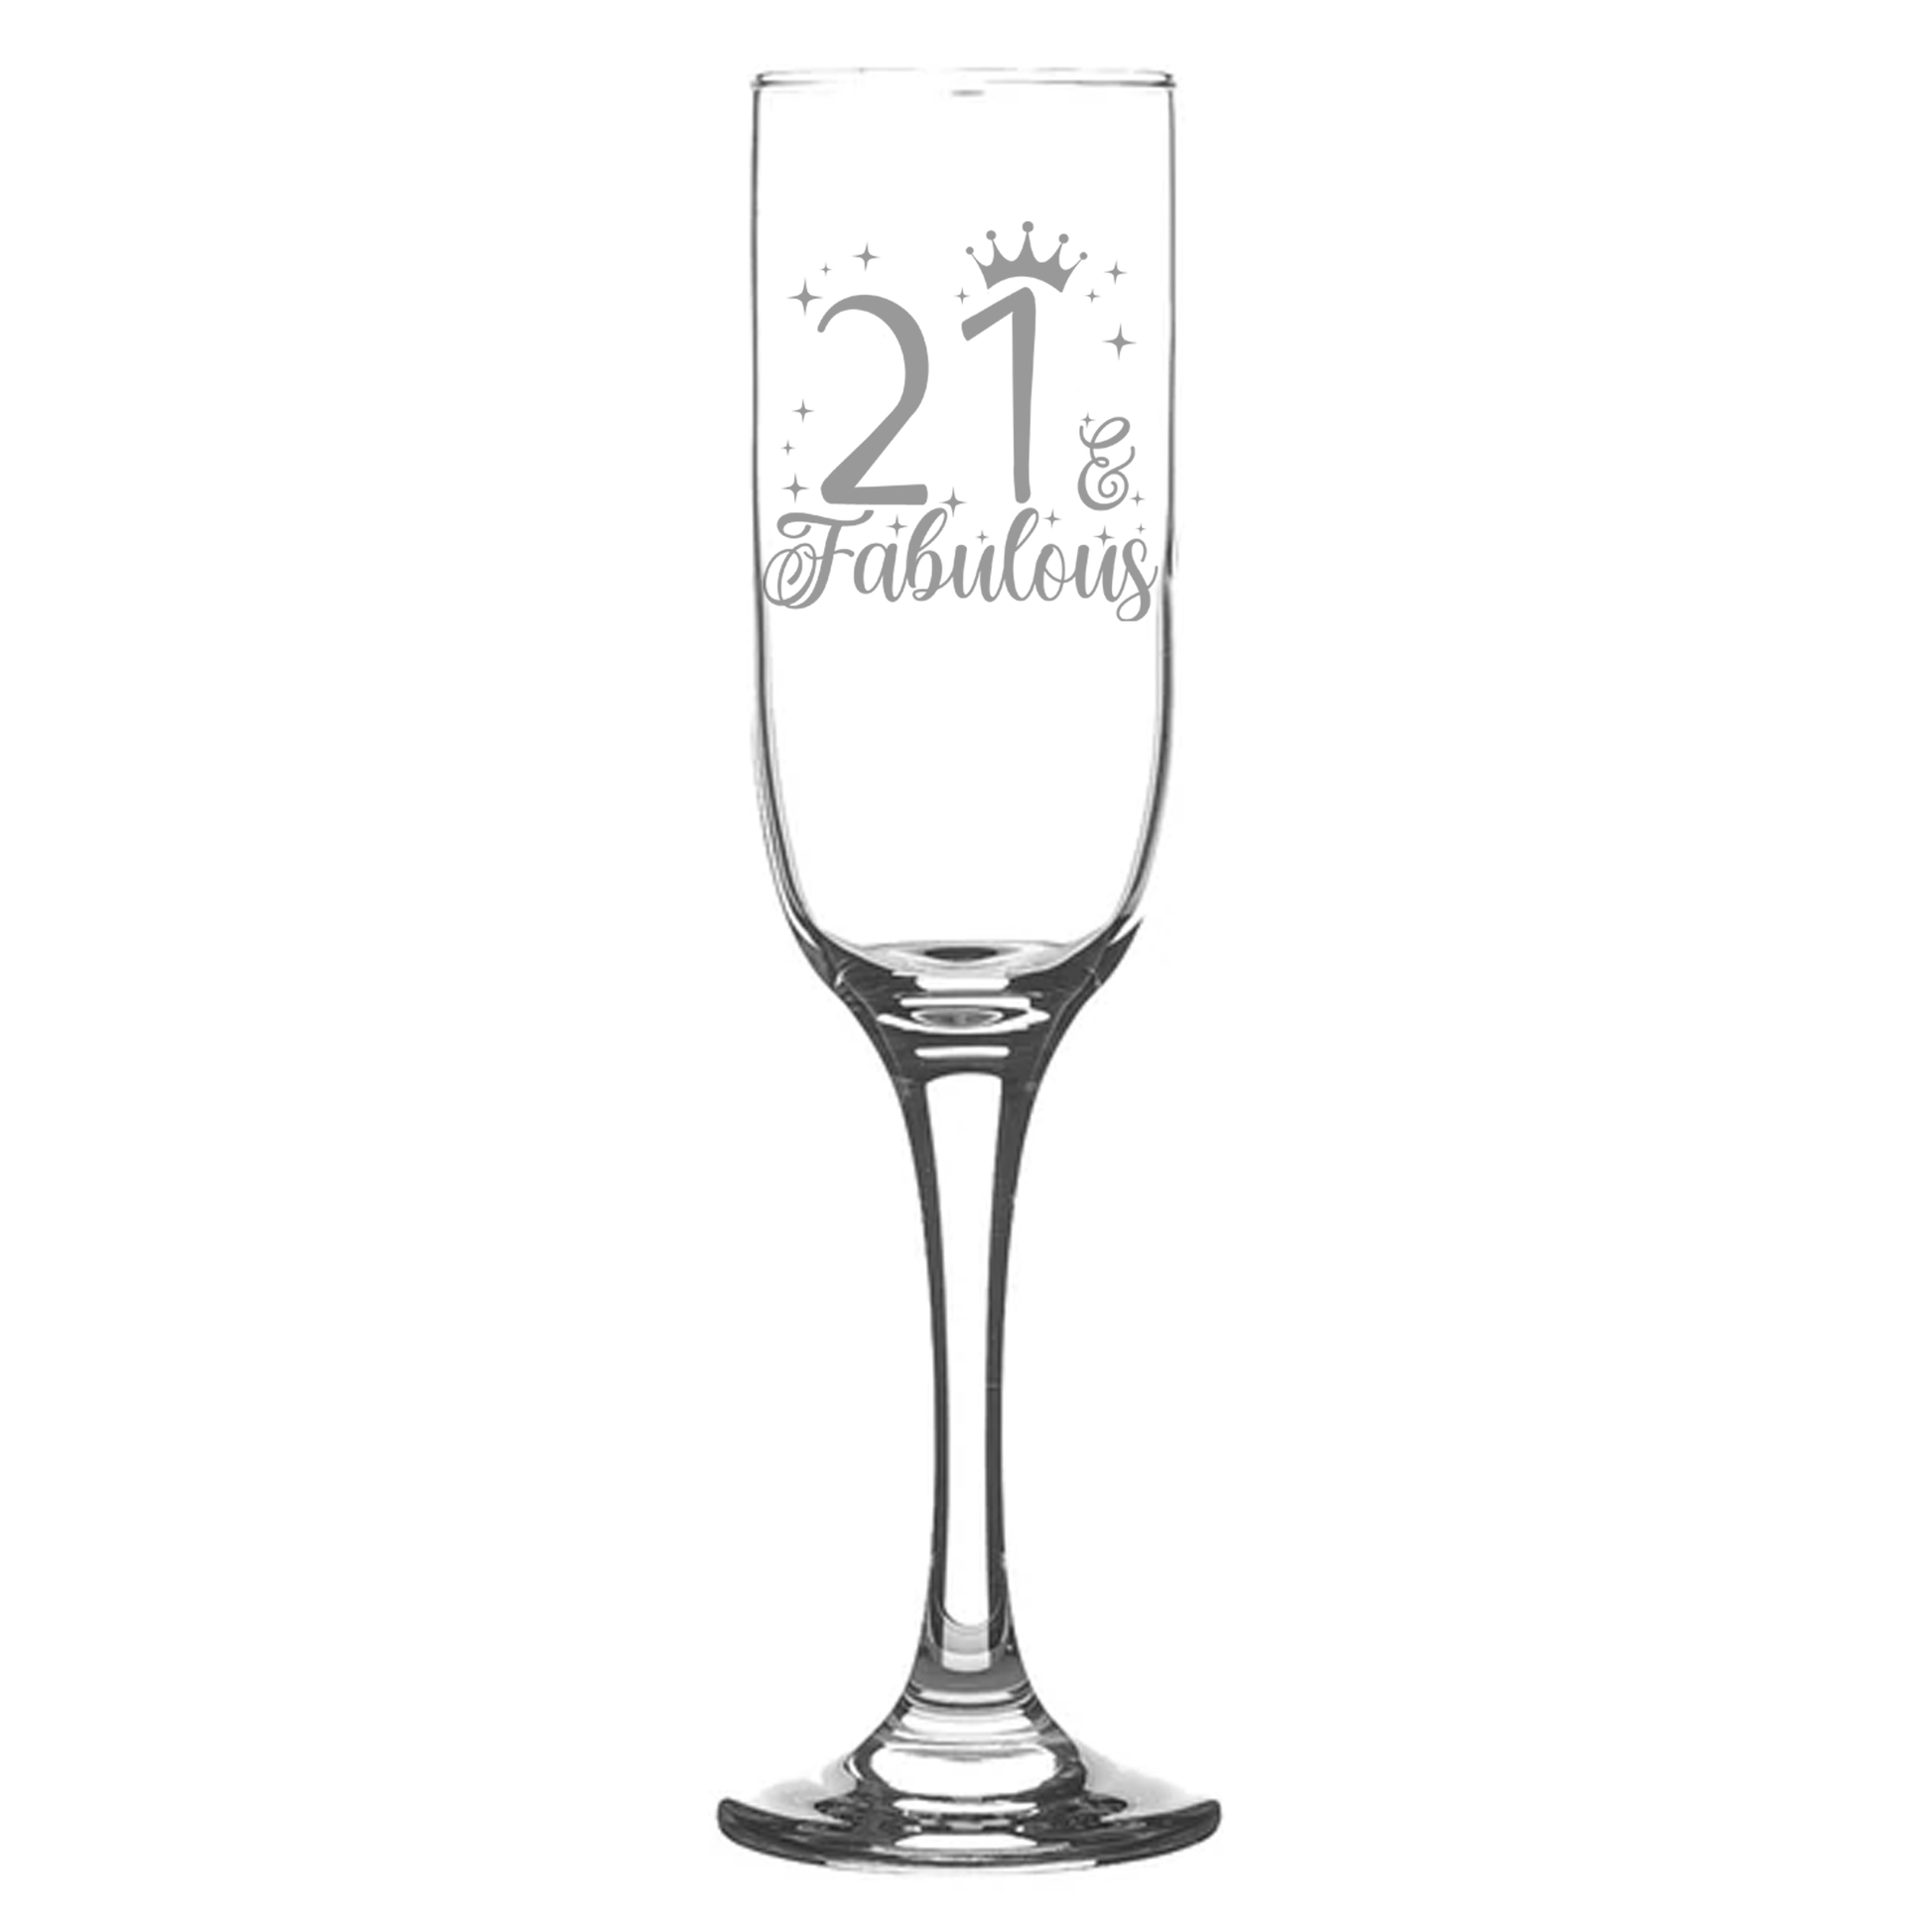 21 & Fabulous Engraved Champagne Glass and/or Coaster Set  - Always Looking Good - Champagne Glass On Its Own  